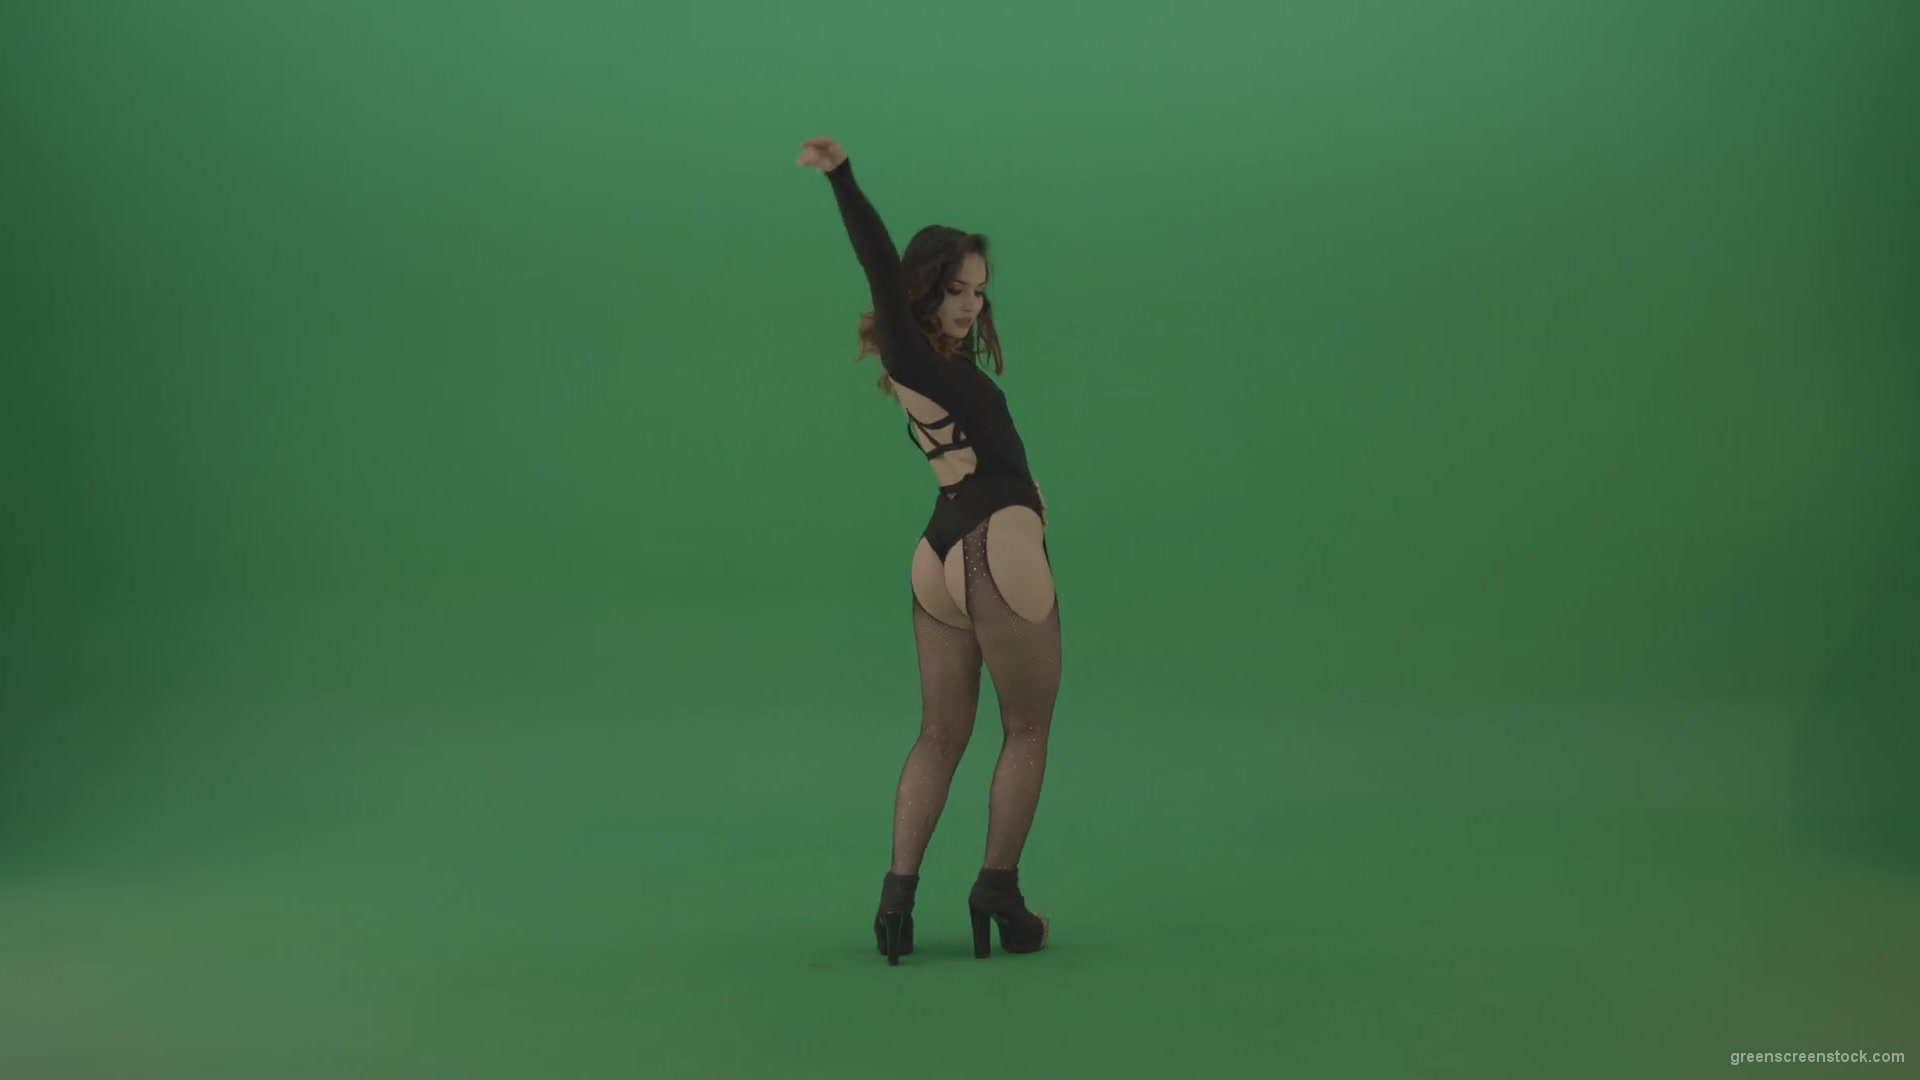 Beauty-girl-funny-shaking-the-ass-and-dancing-isolated-on-green-screen-1920_007 Green Screen Stock